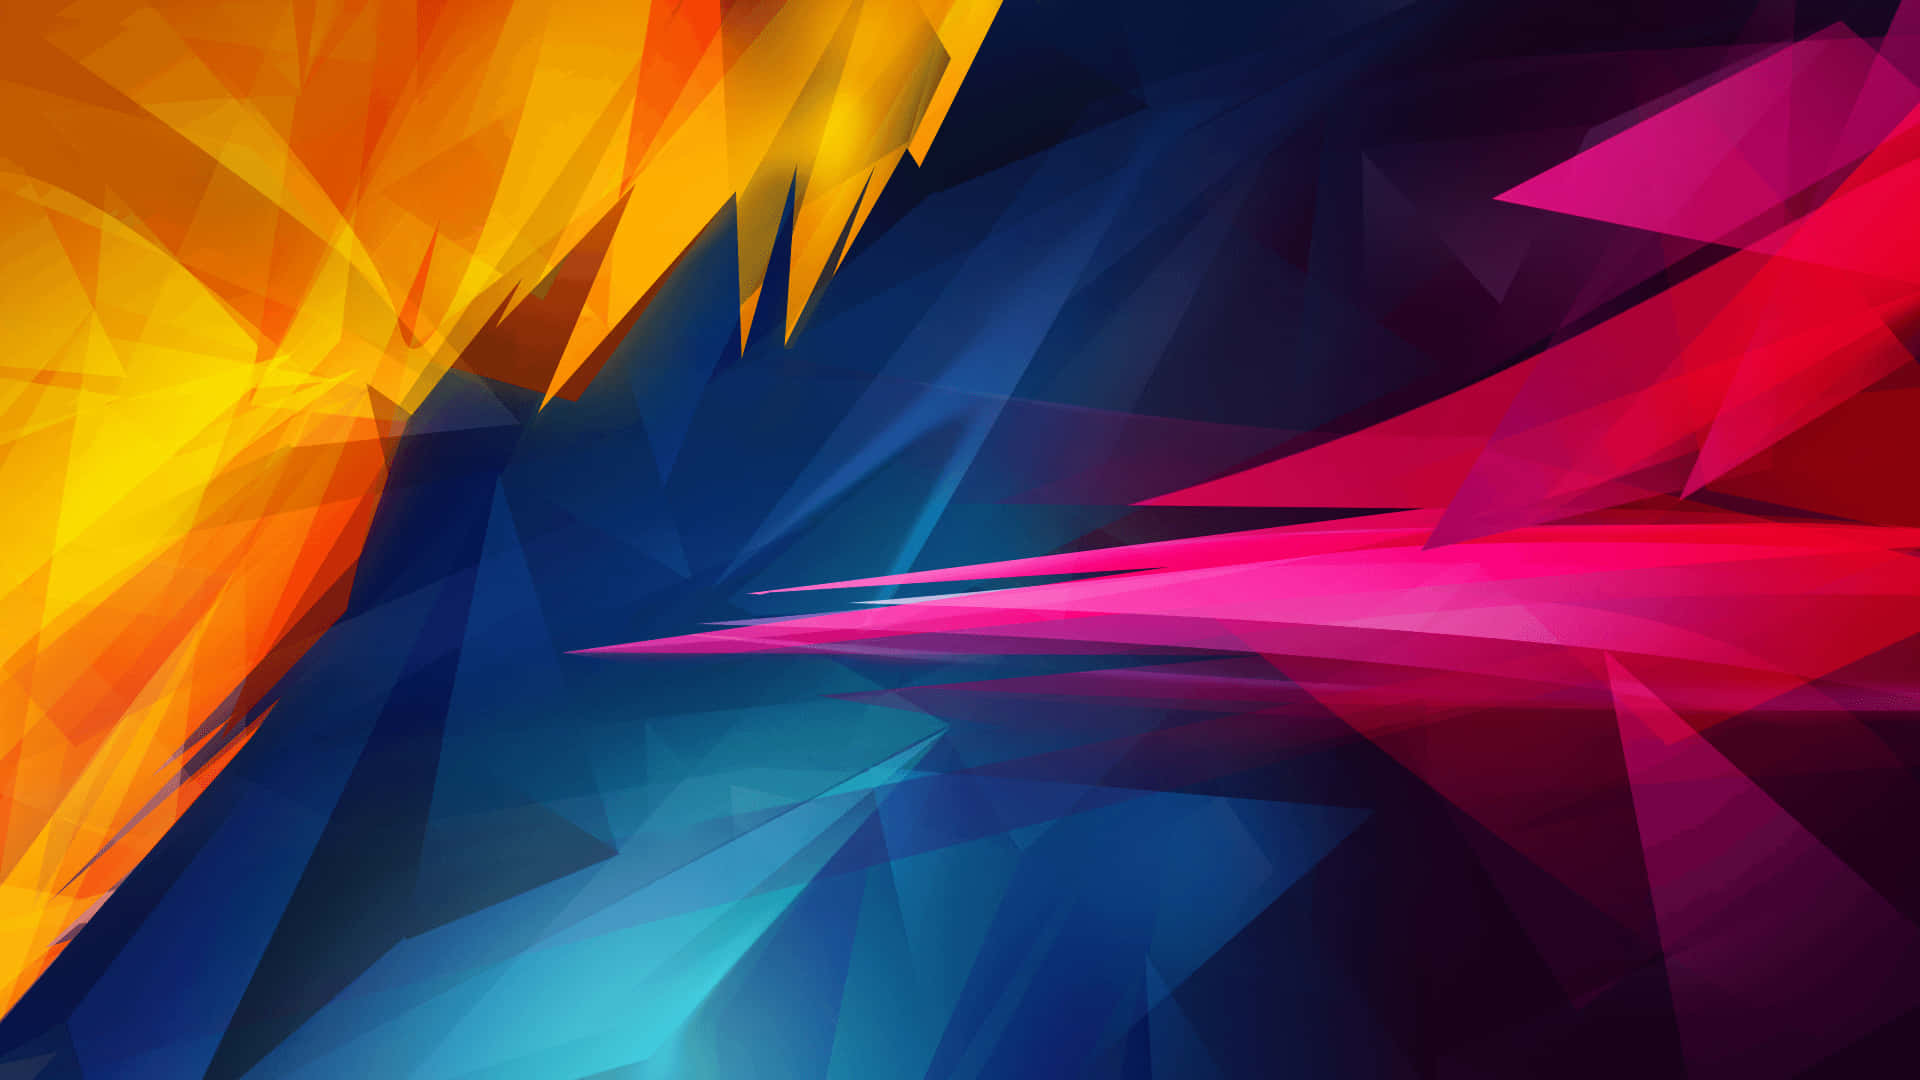 Free Cool Abstract Wallpaper Downloads, [100+] Cool Abstract Wallpapers for  FREE 